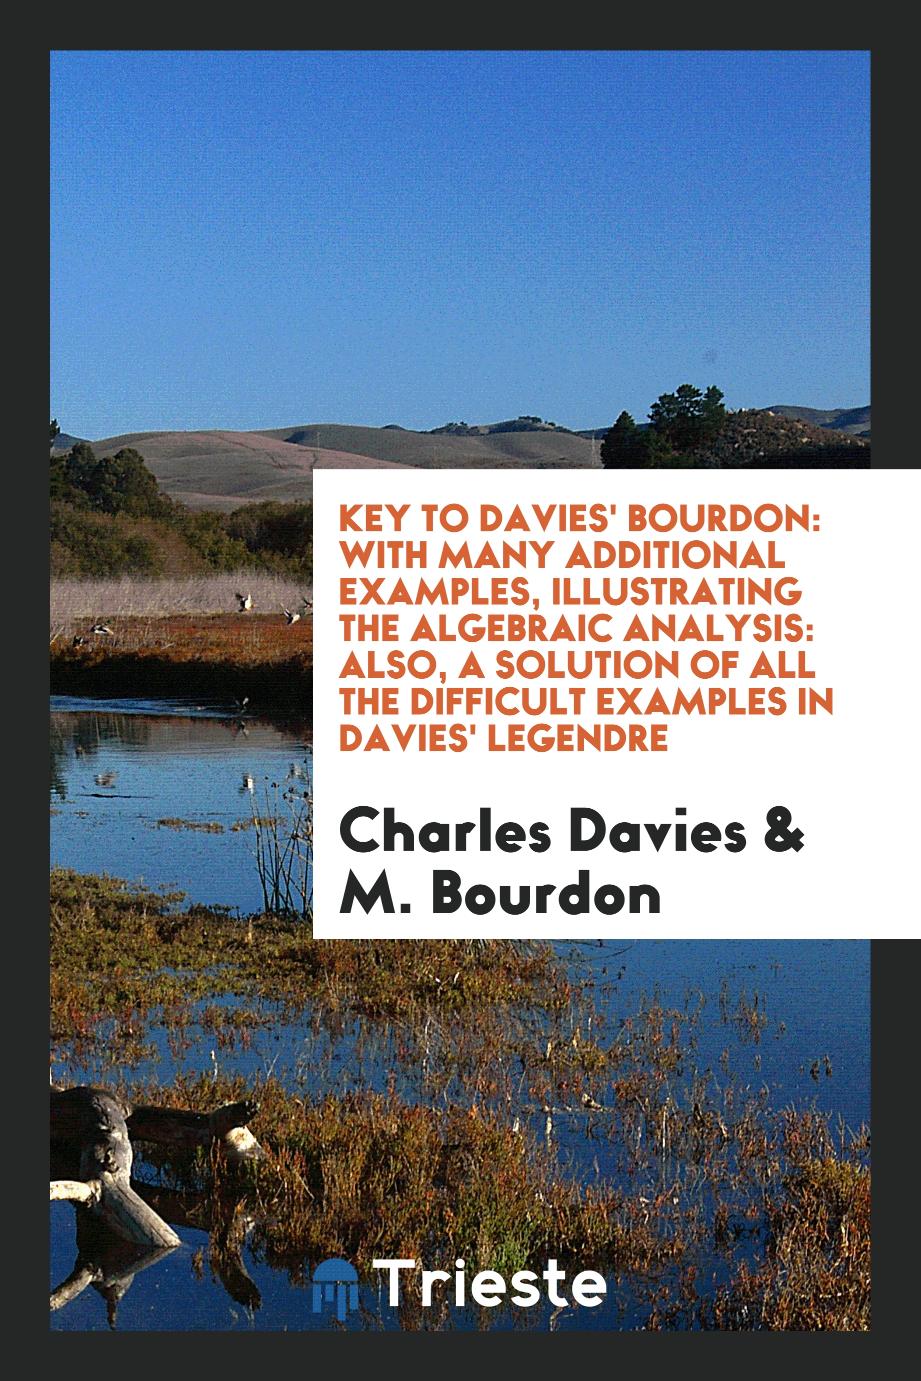 Key to Davies' Bourdon: with many additional examples, illustrating the algebraic analysis: also, a solution of all the difficult examples in Davies' Legendre